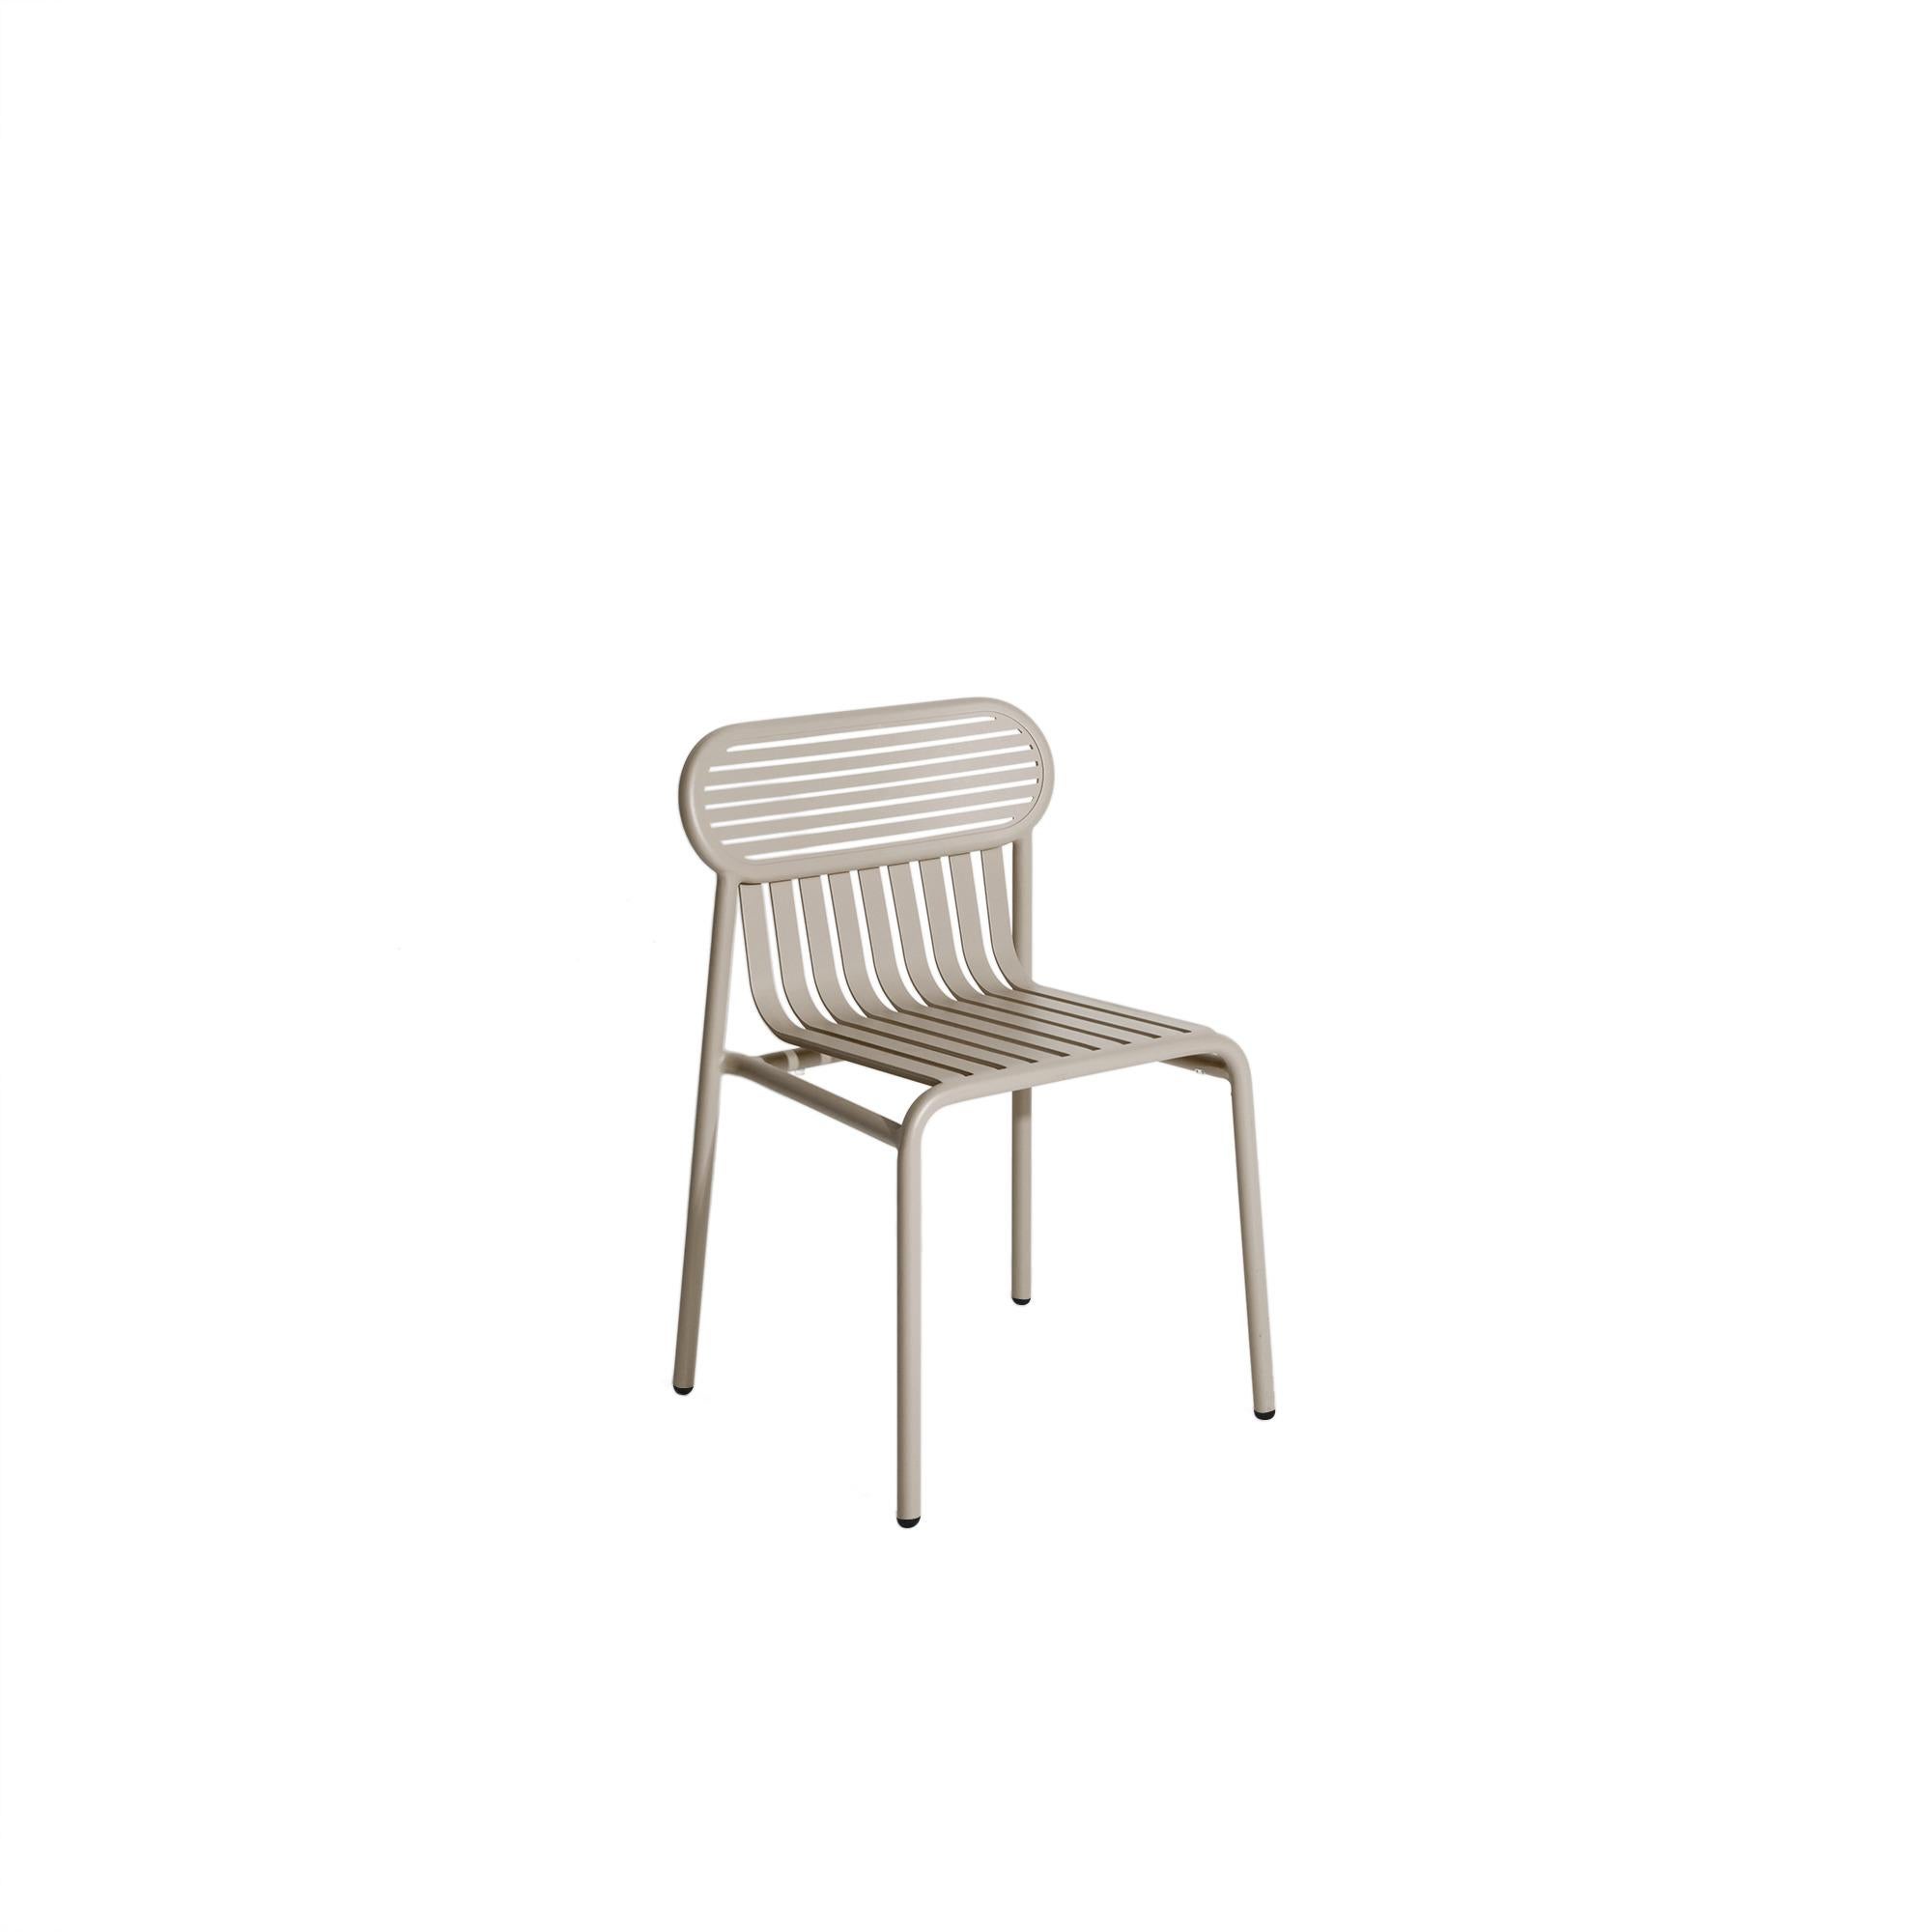 Petite Friture Week-End Chair in Dune Aluminium by Studio BrichetZiegler, 2017

The week-end collection is a full range of outdoor furniture, in aluminium grained epoxy paint, matt finish, that includes 18 functions and 8 colours for the retail